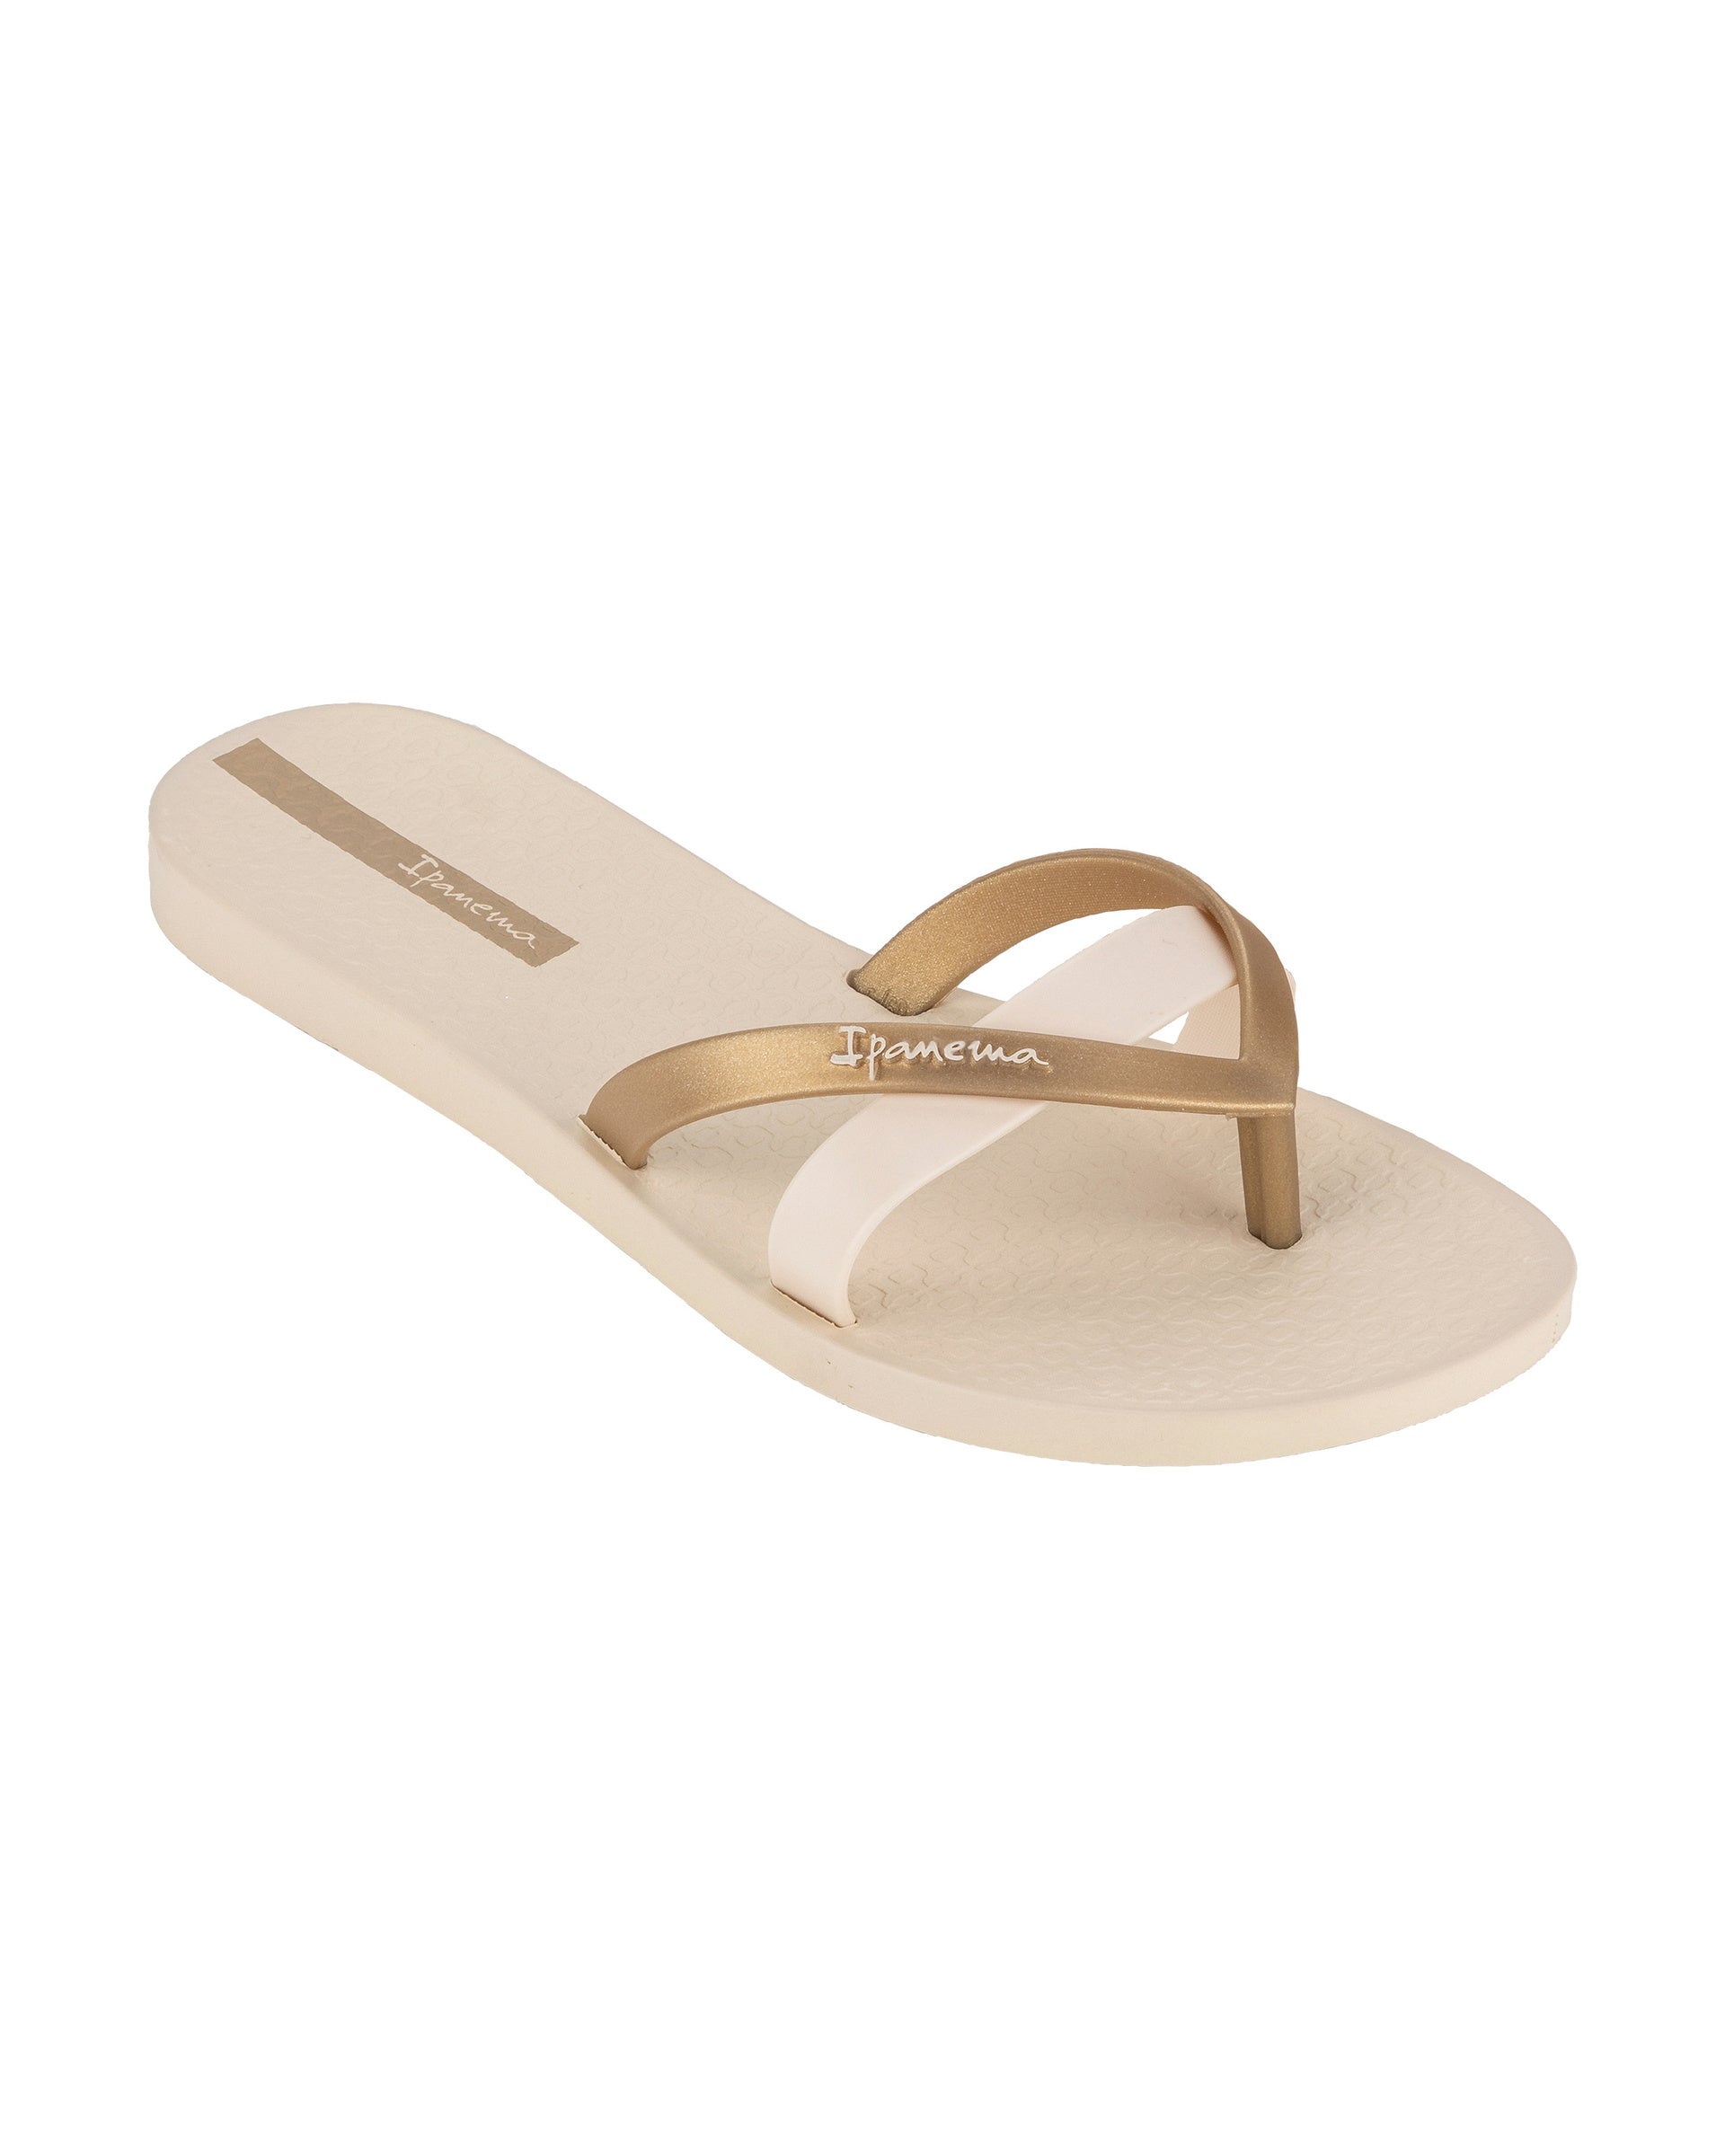 Angled view of a beige and gold Ipanema Kirei women's flip flop.